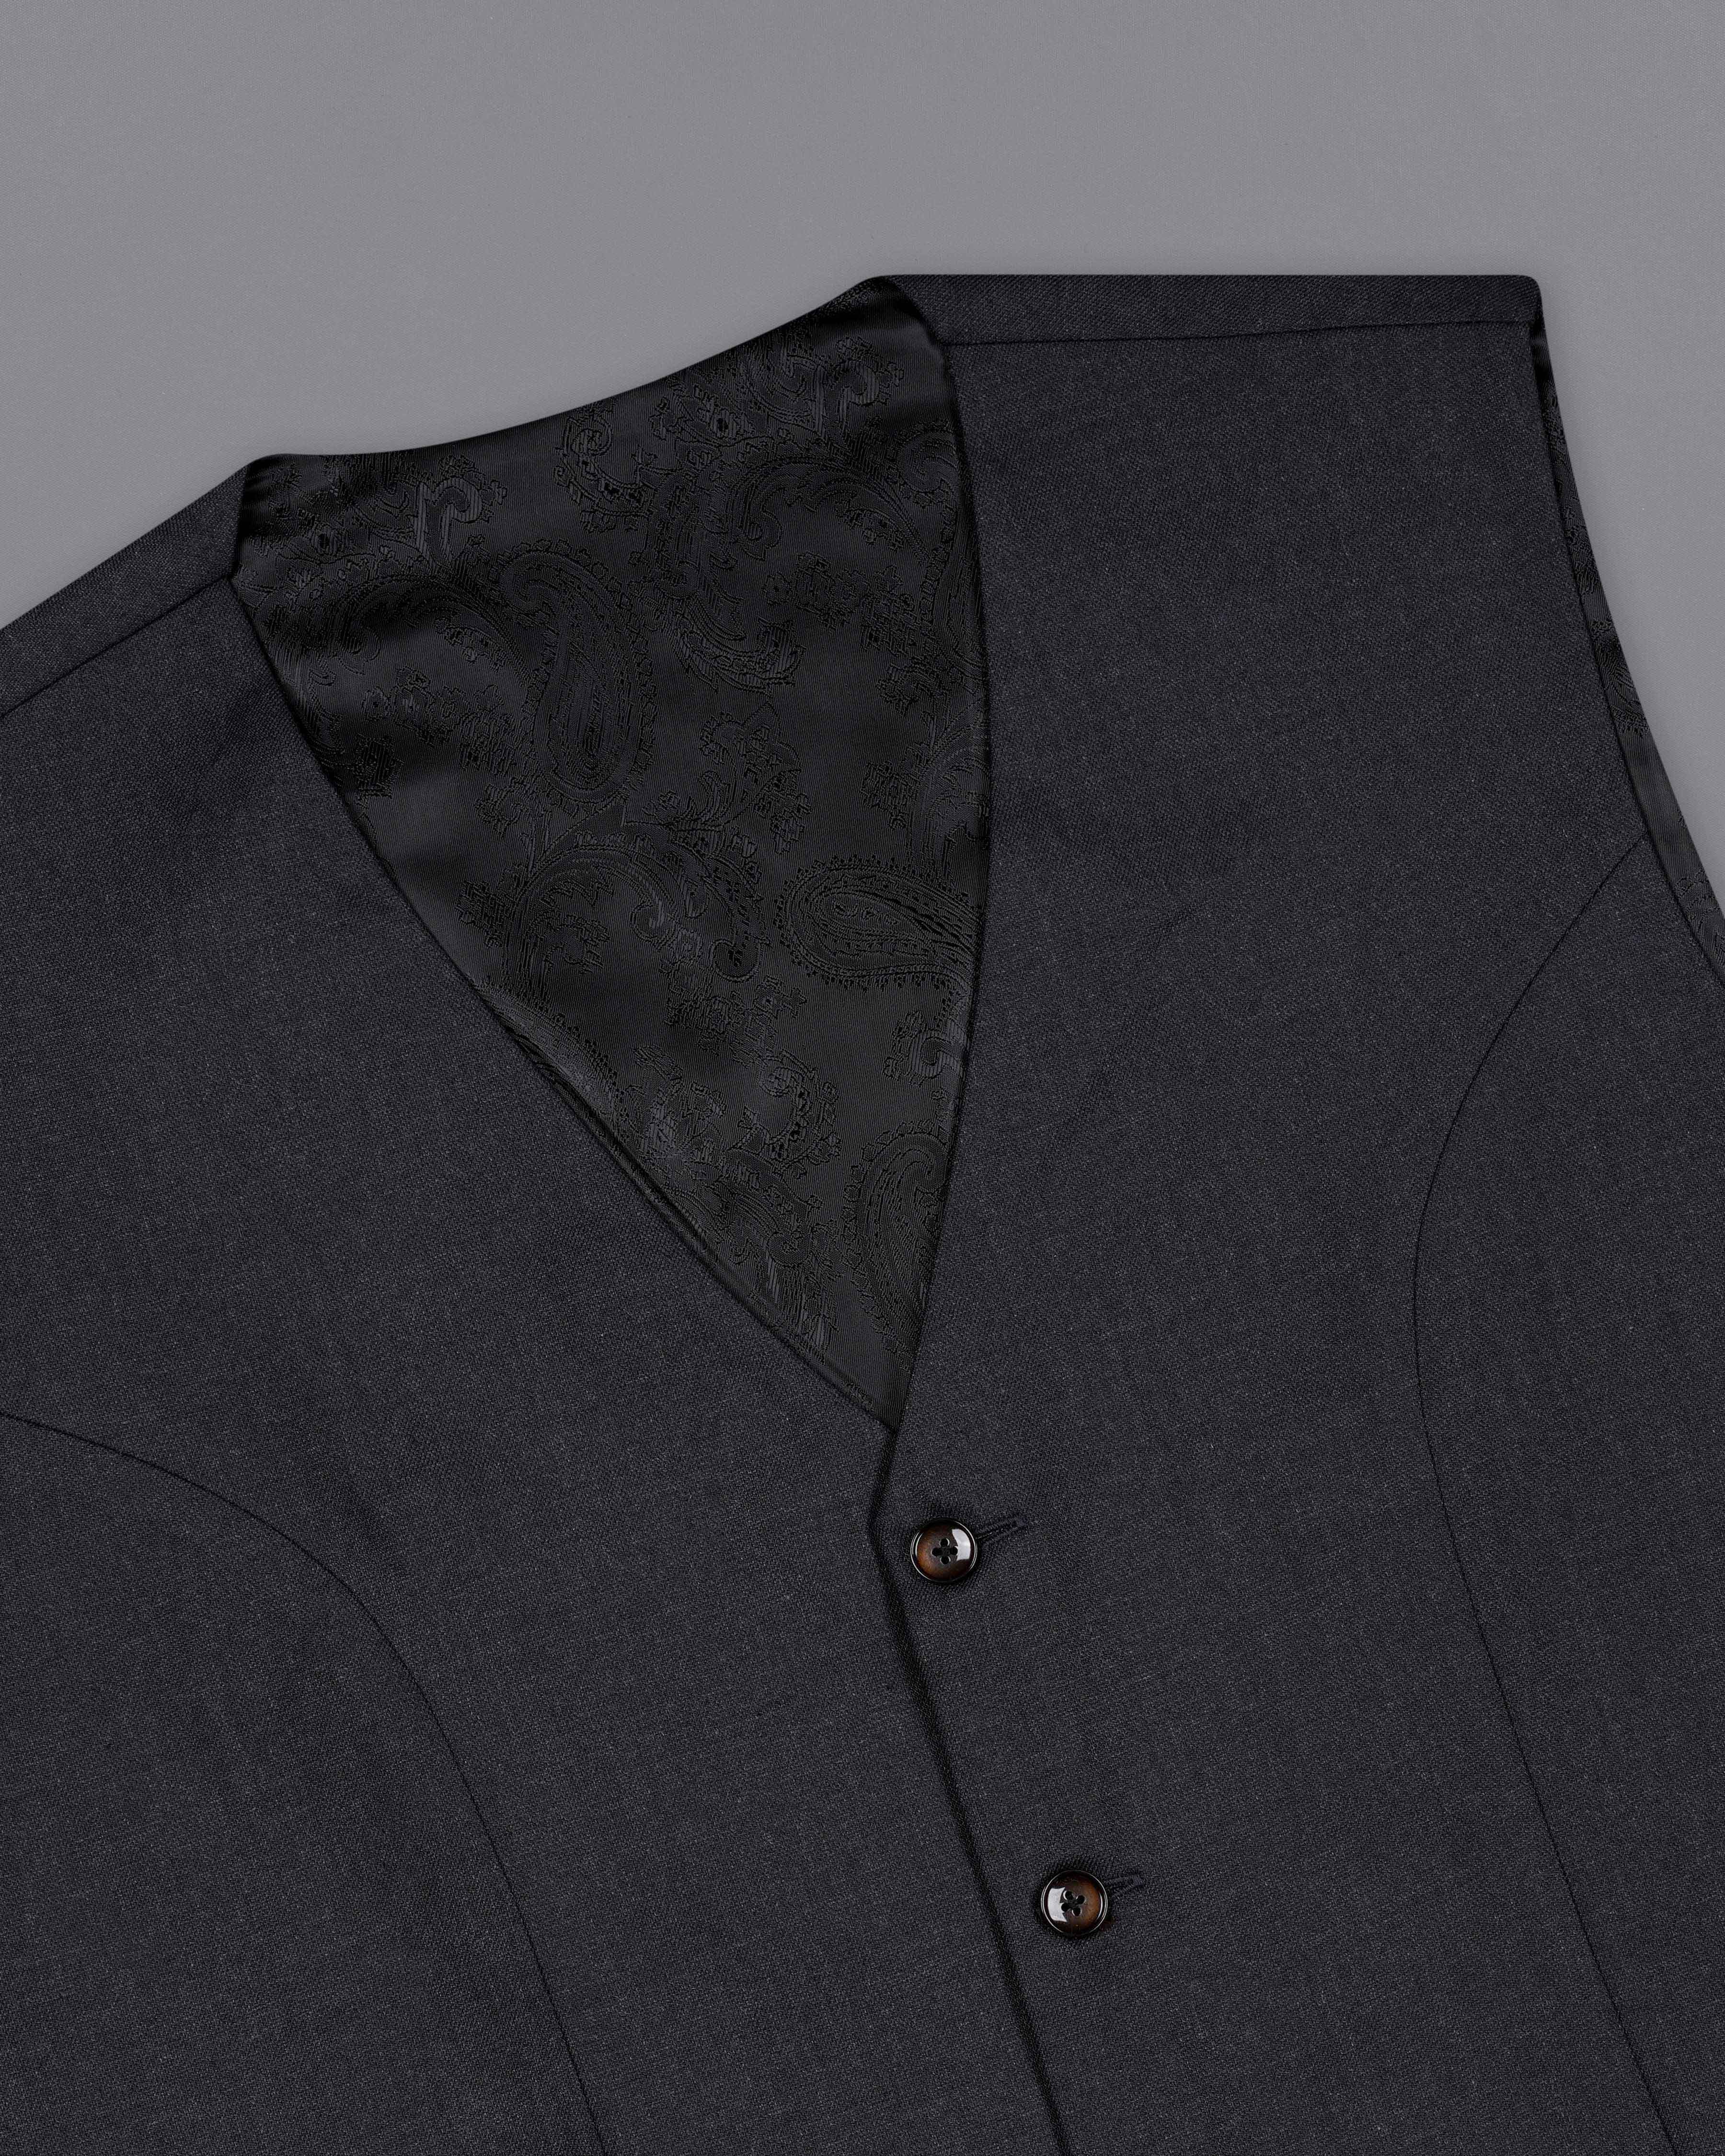 Mirage Black Double Breasted Suit